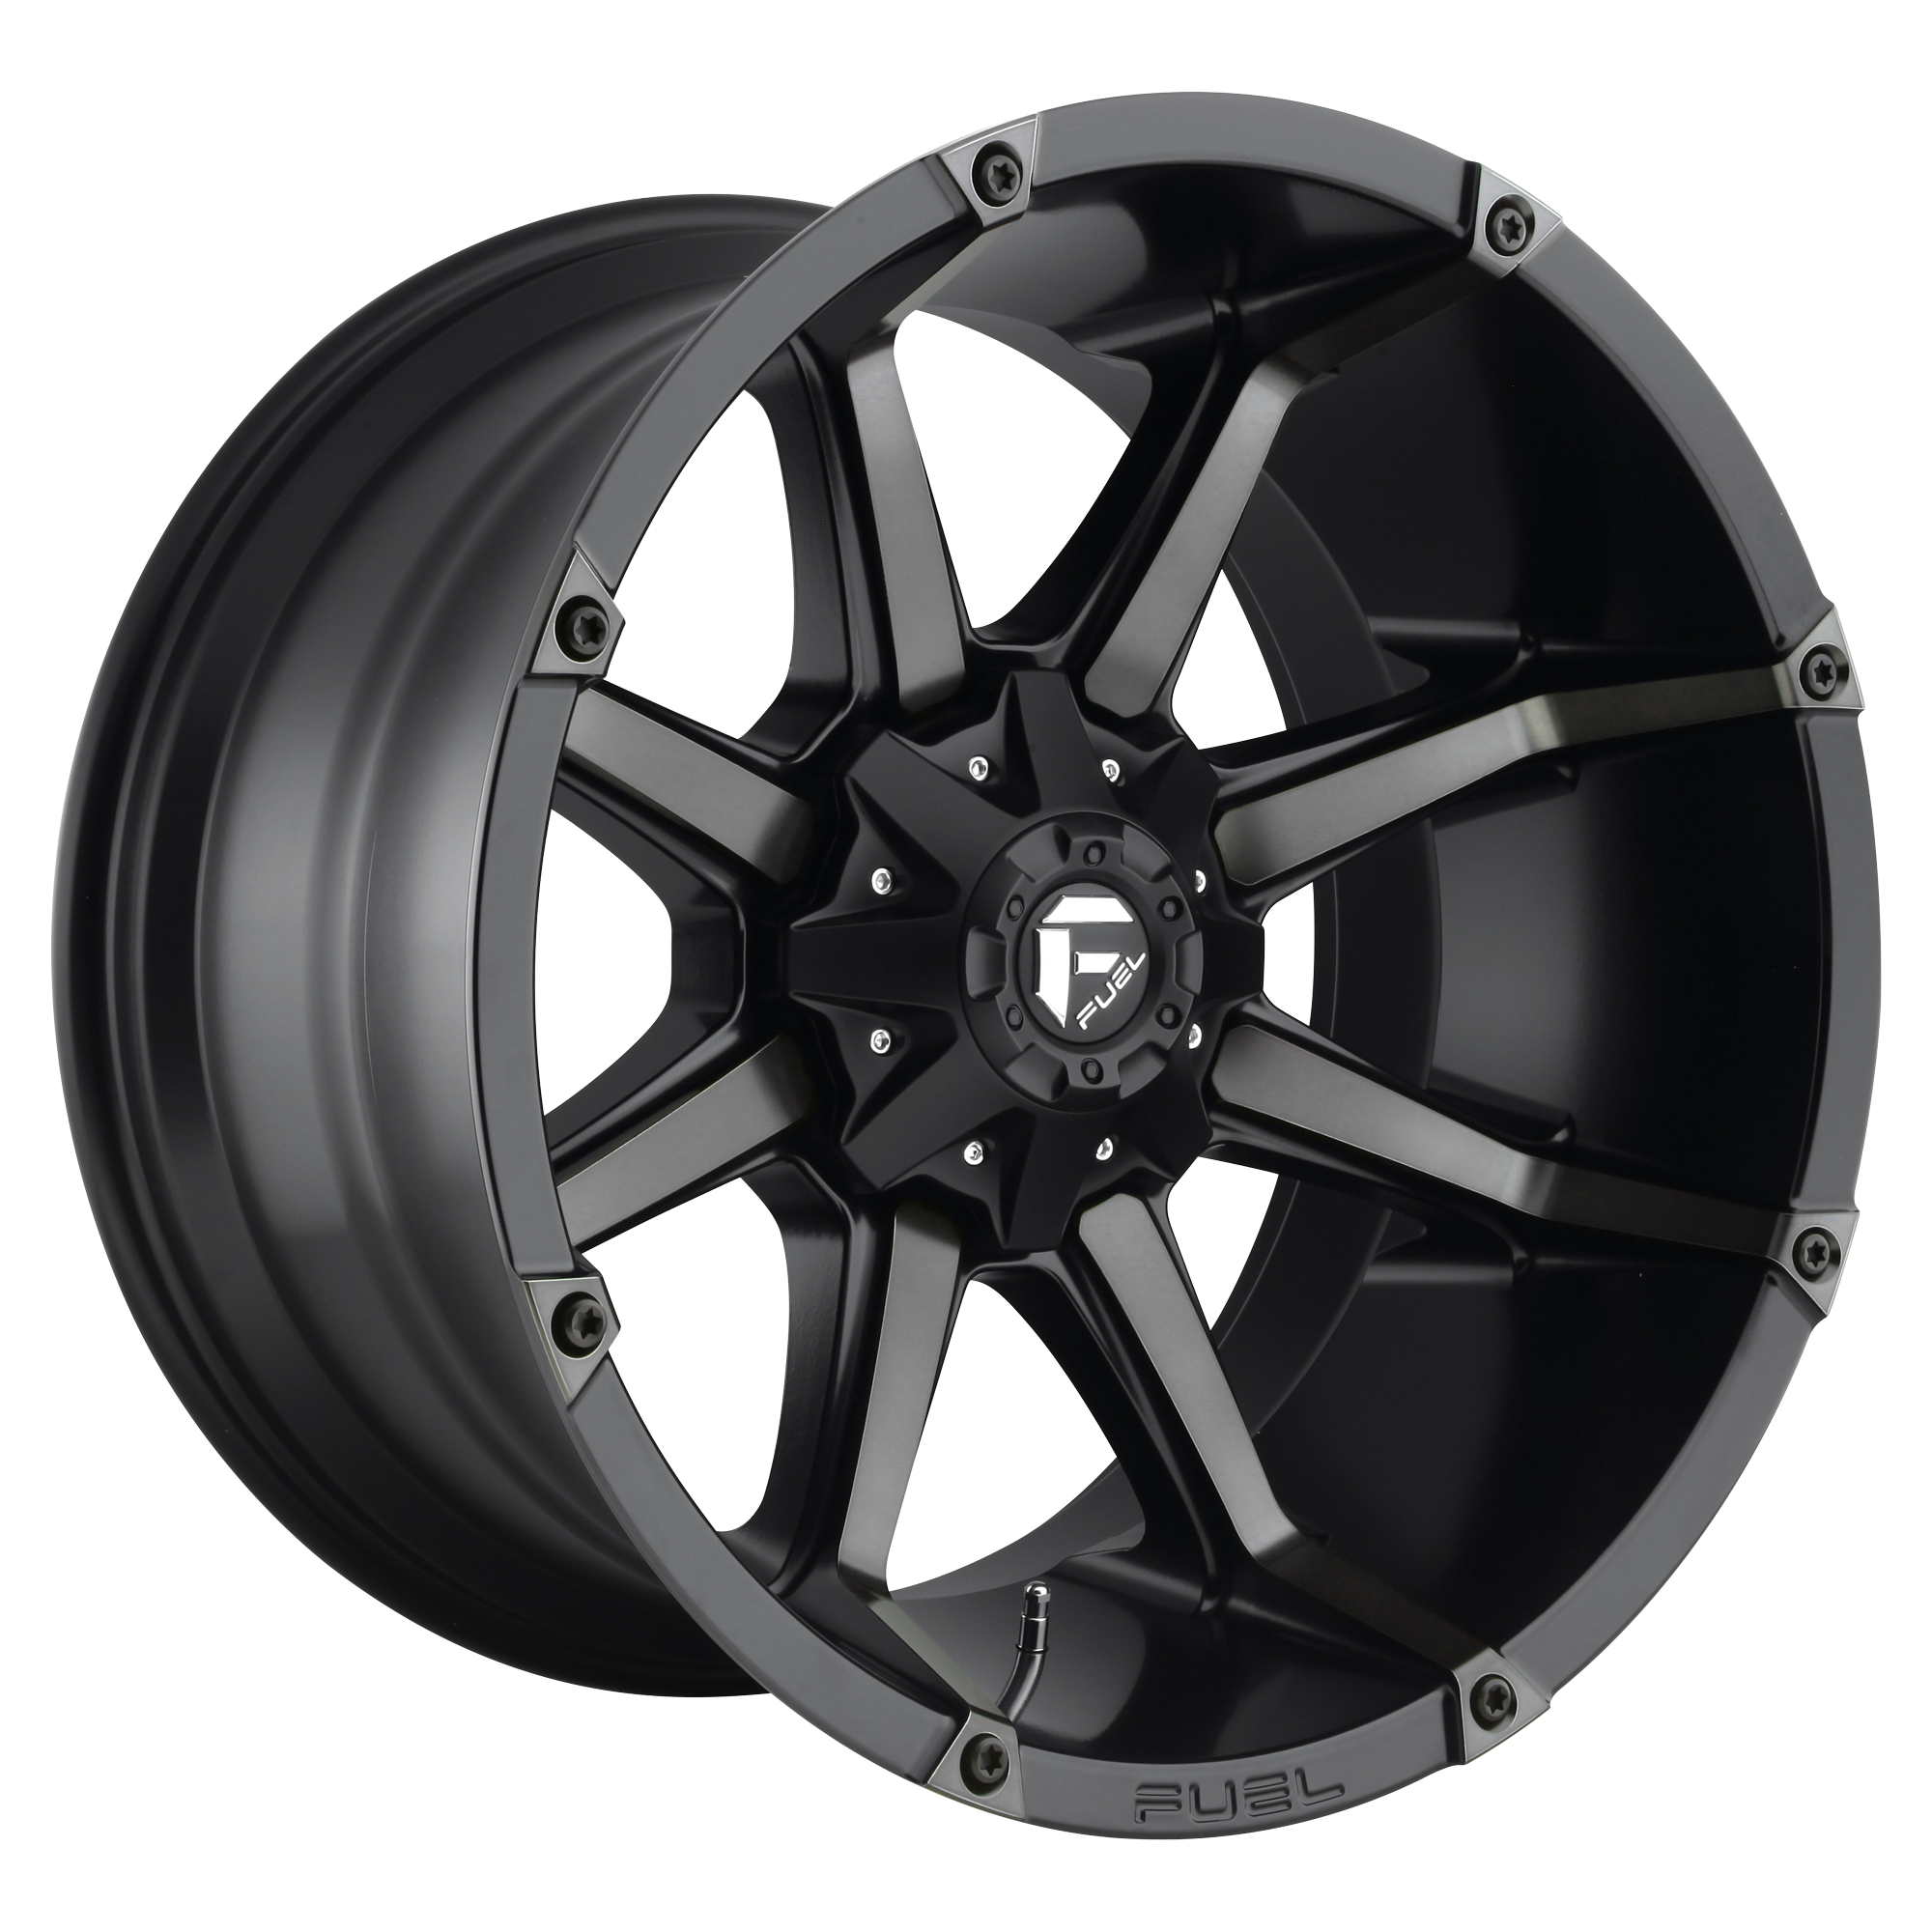 COUPLER 20x9 6x135.00/6x139.70 MATTE BLACK DOUBLE DARK TINT (20 mm) - Tires and Engine Performance